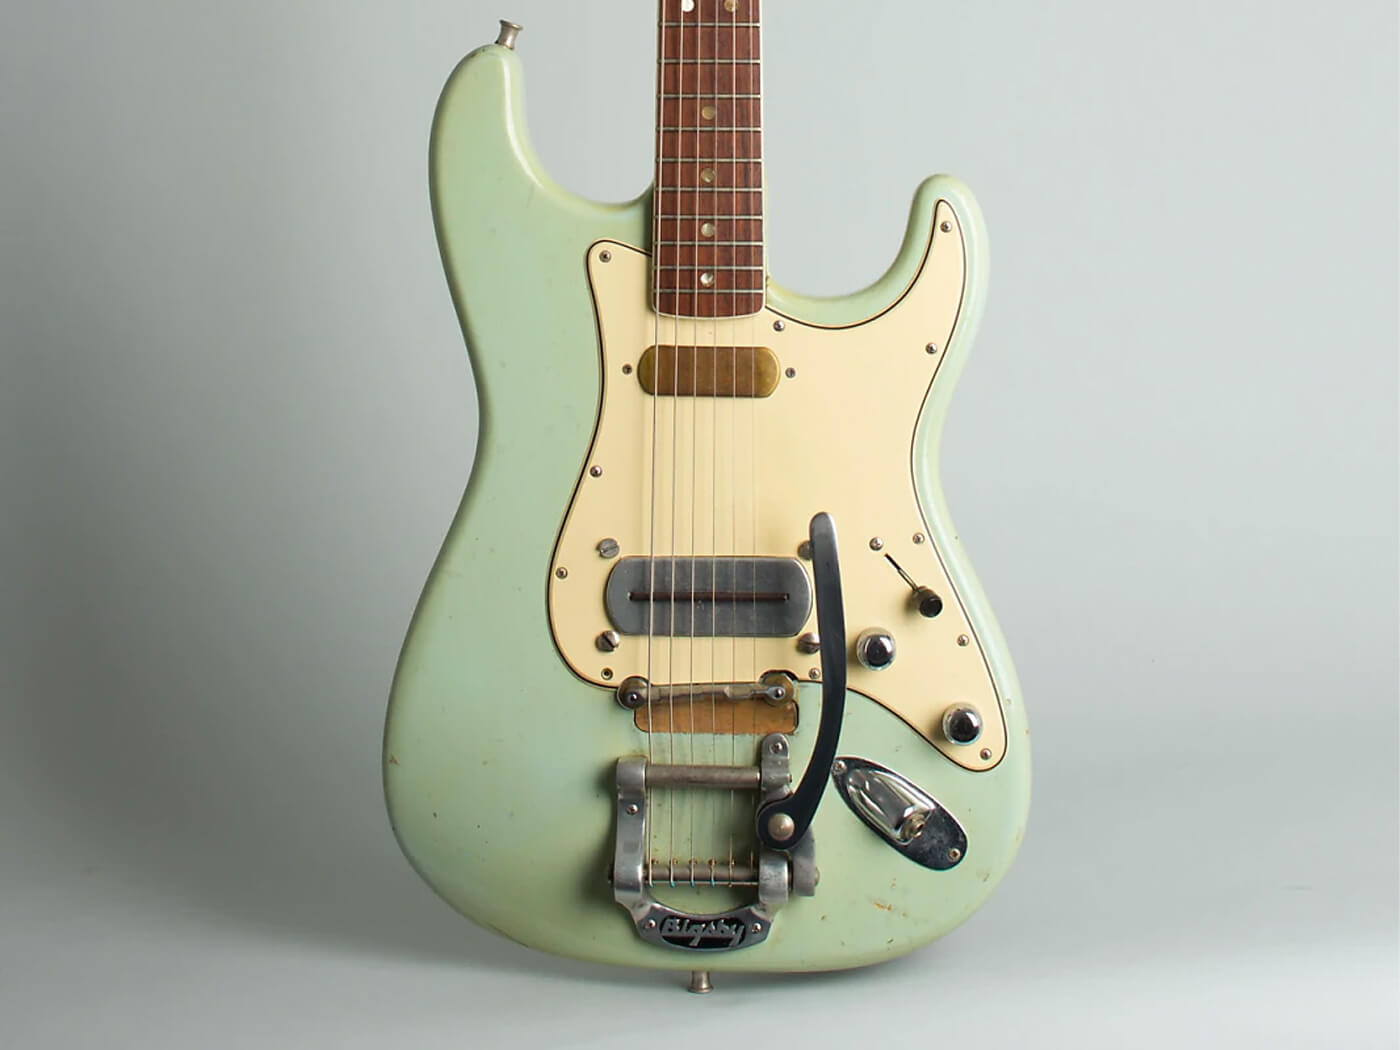 Ry Cooder S Original Coodercaster Is Now On Sale For 150 000 Laptrinhx News